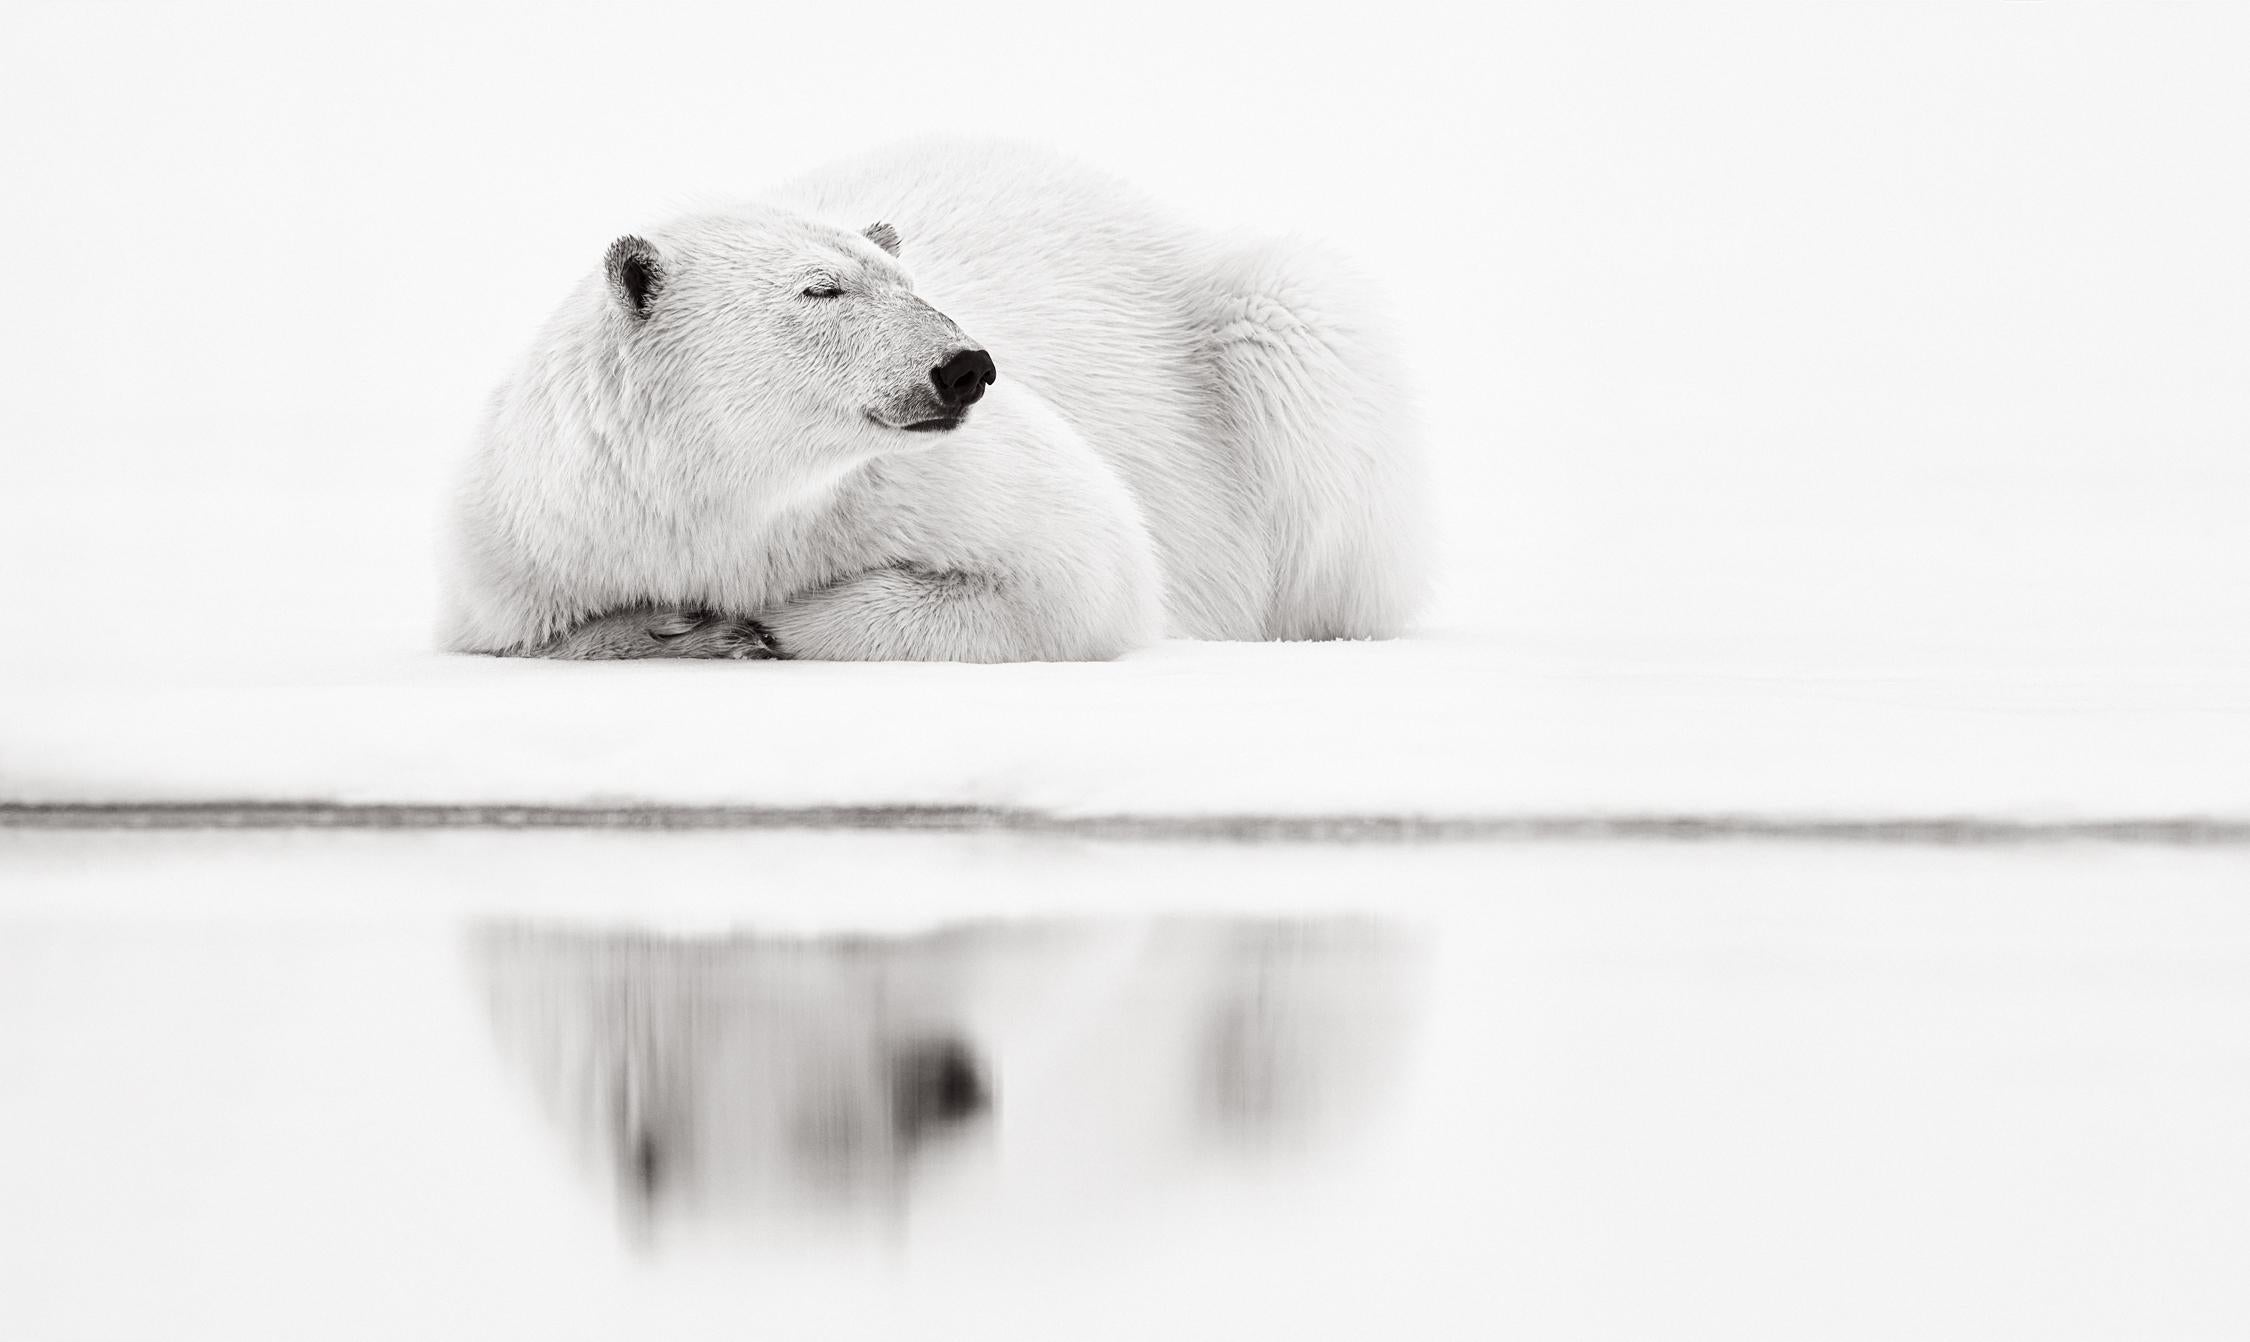 Drew Doggett Black and White Photograph - Polar Bear Resting at Water's Edge, Black & White Photography